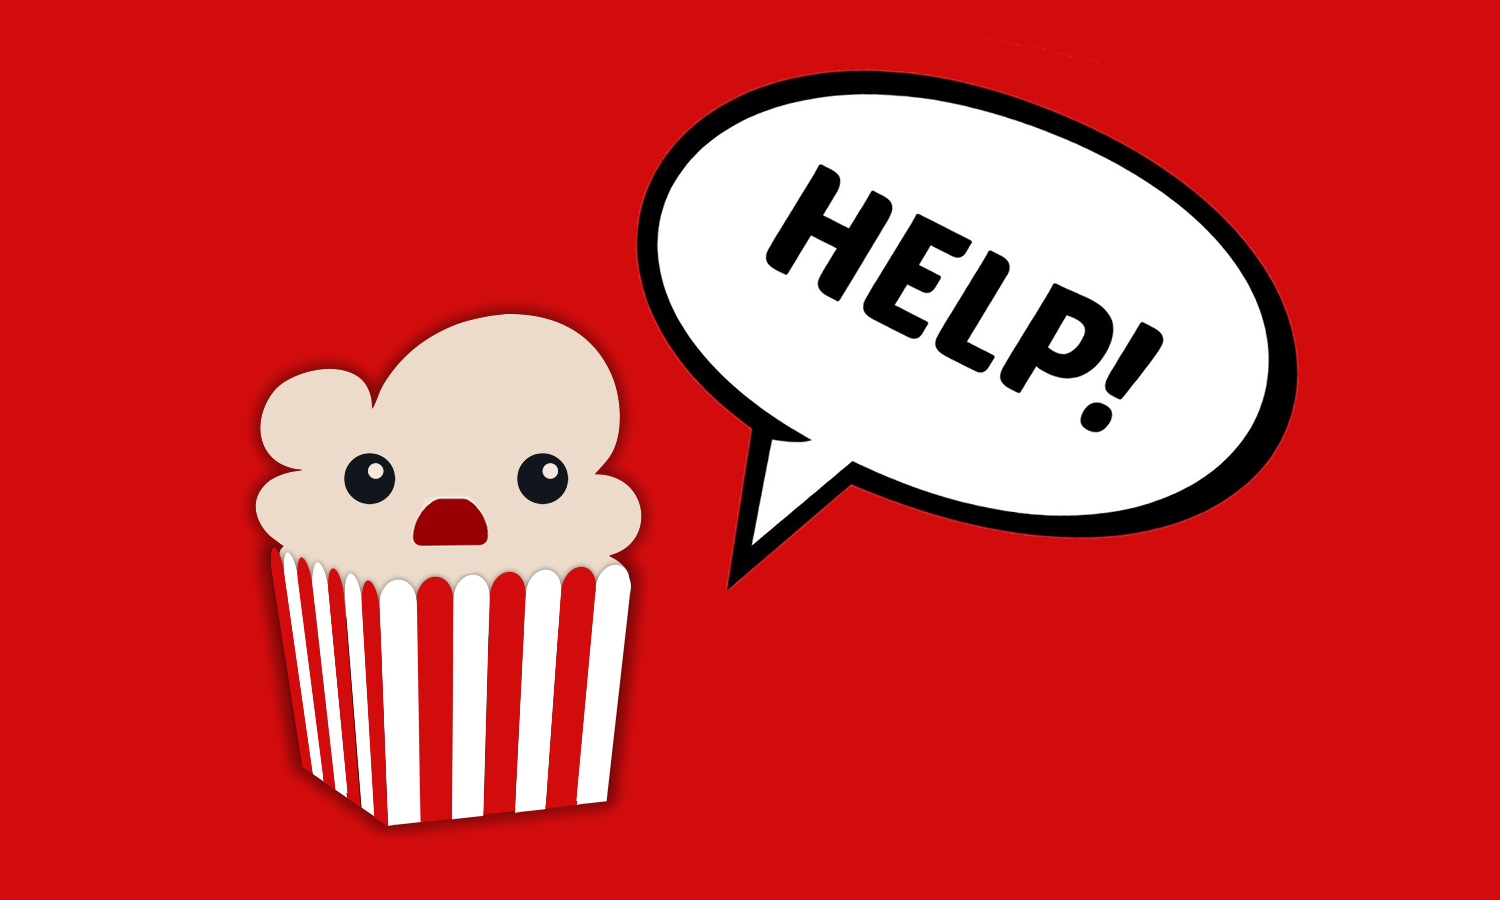 Popcorn Time users in U.S. hit with lawsuits - SlashGear